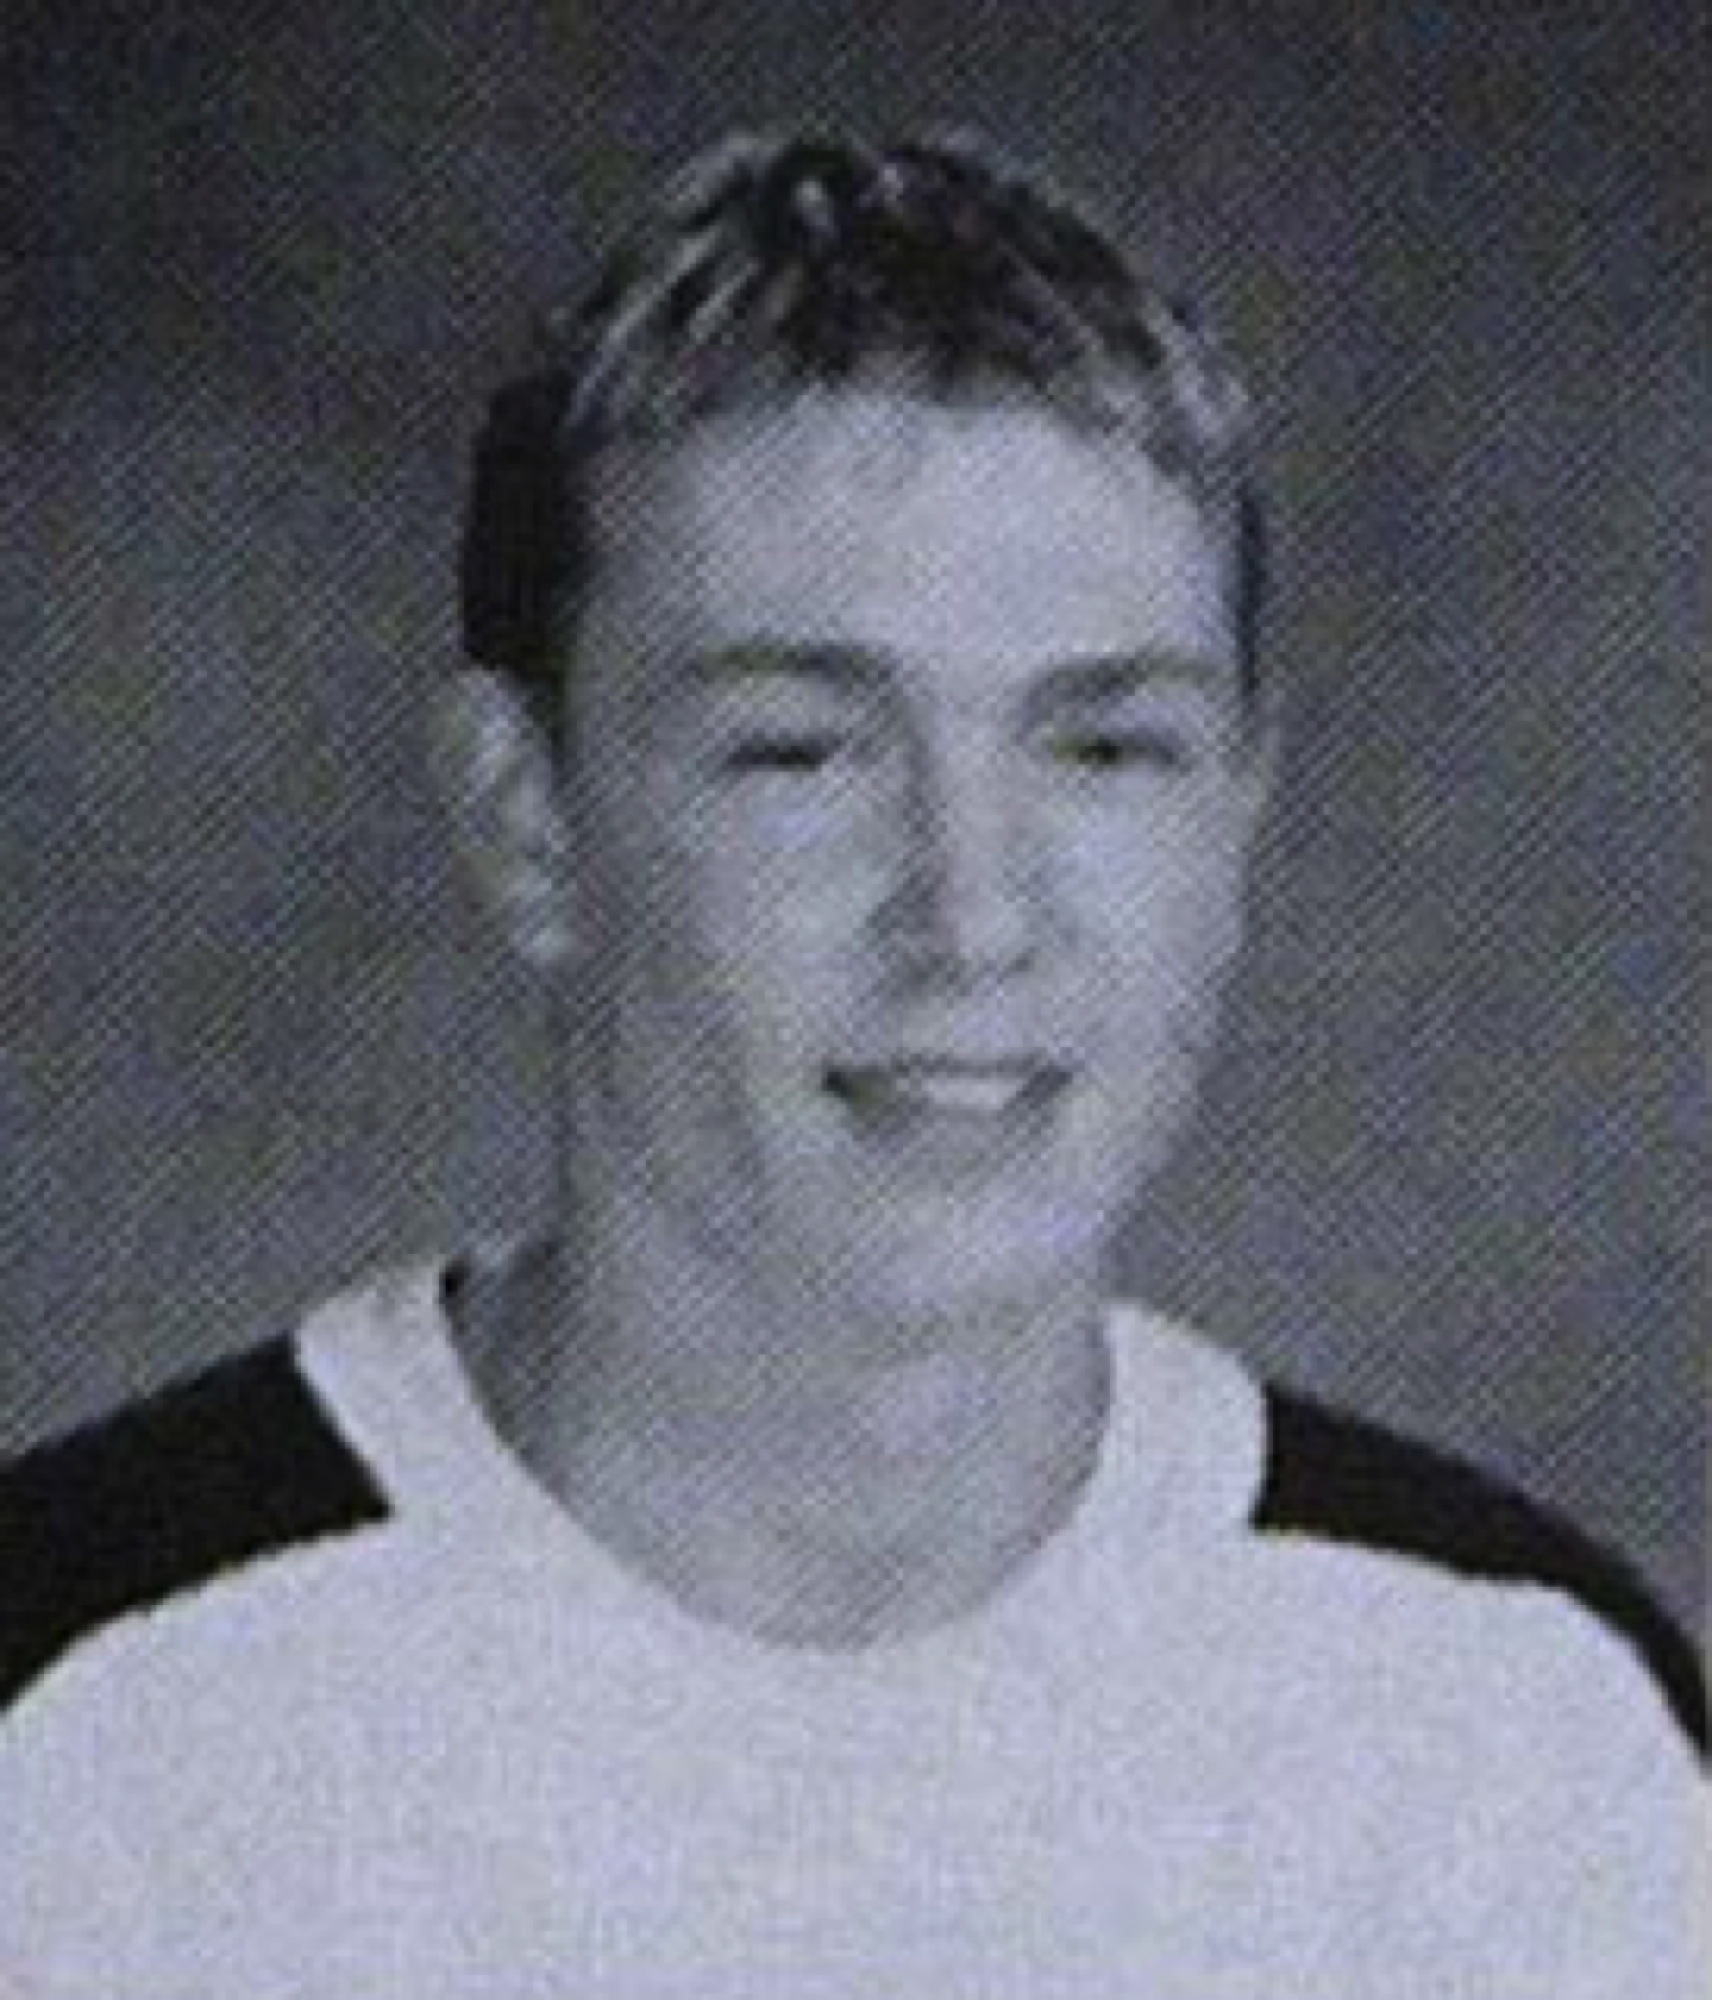 Chad Michael Murray yearbook photo one at Aol.com at Aol.com